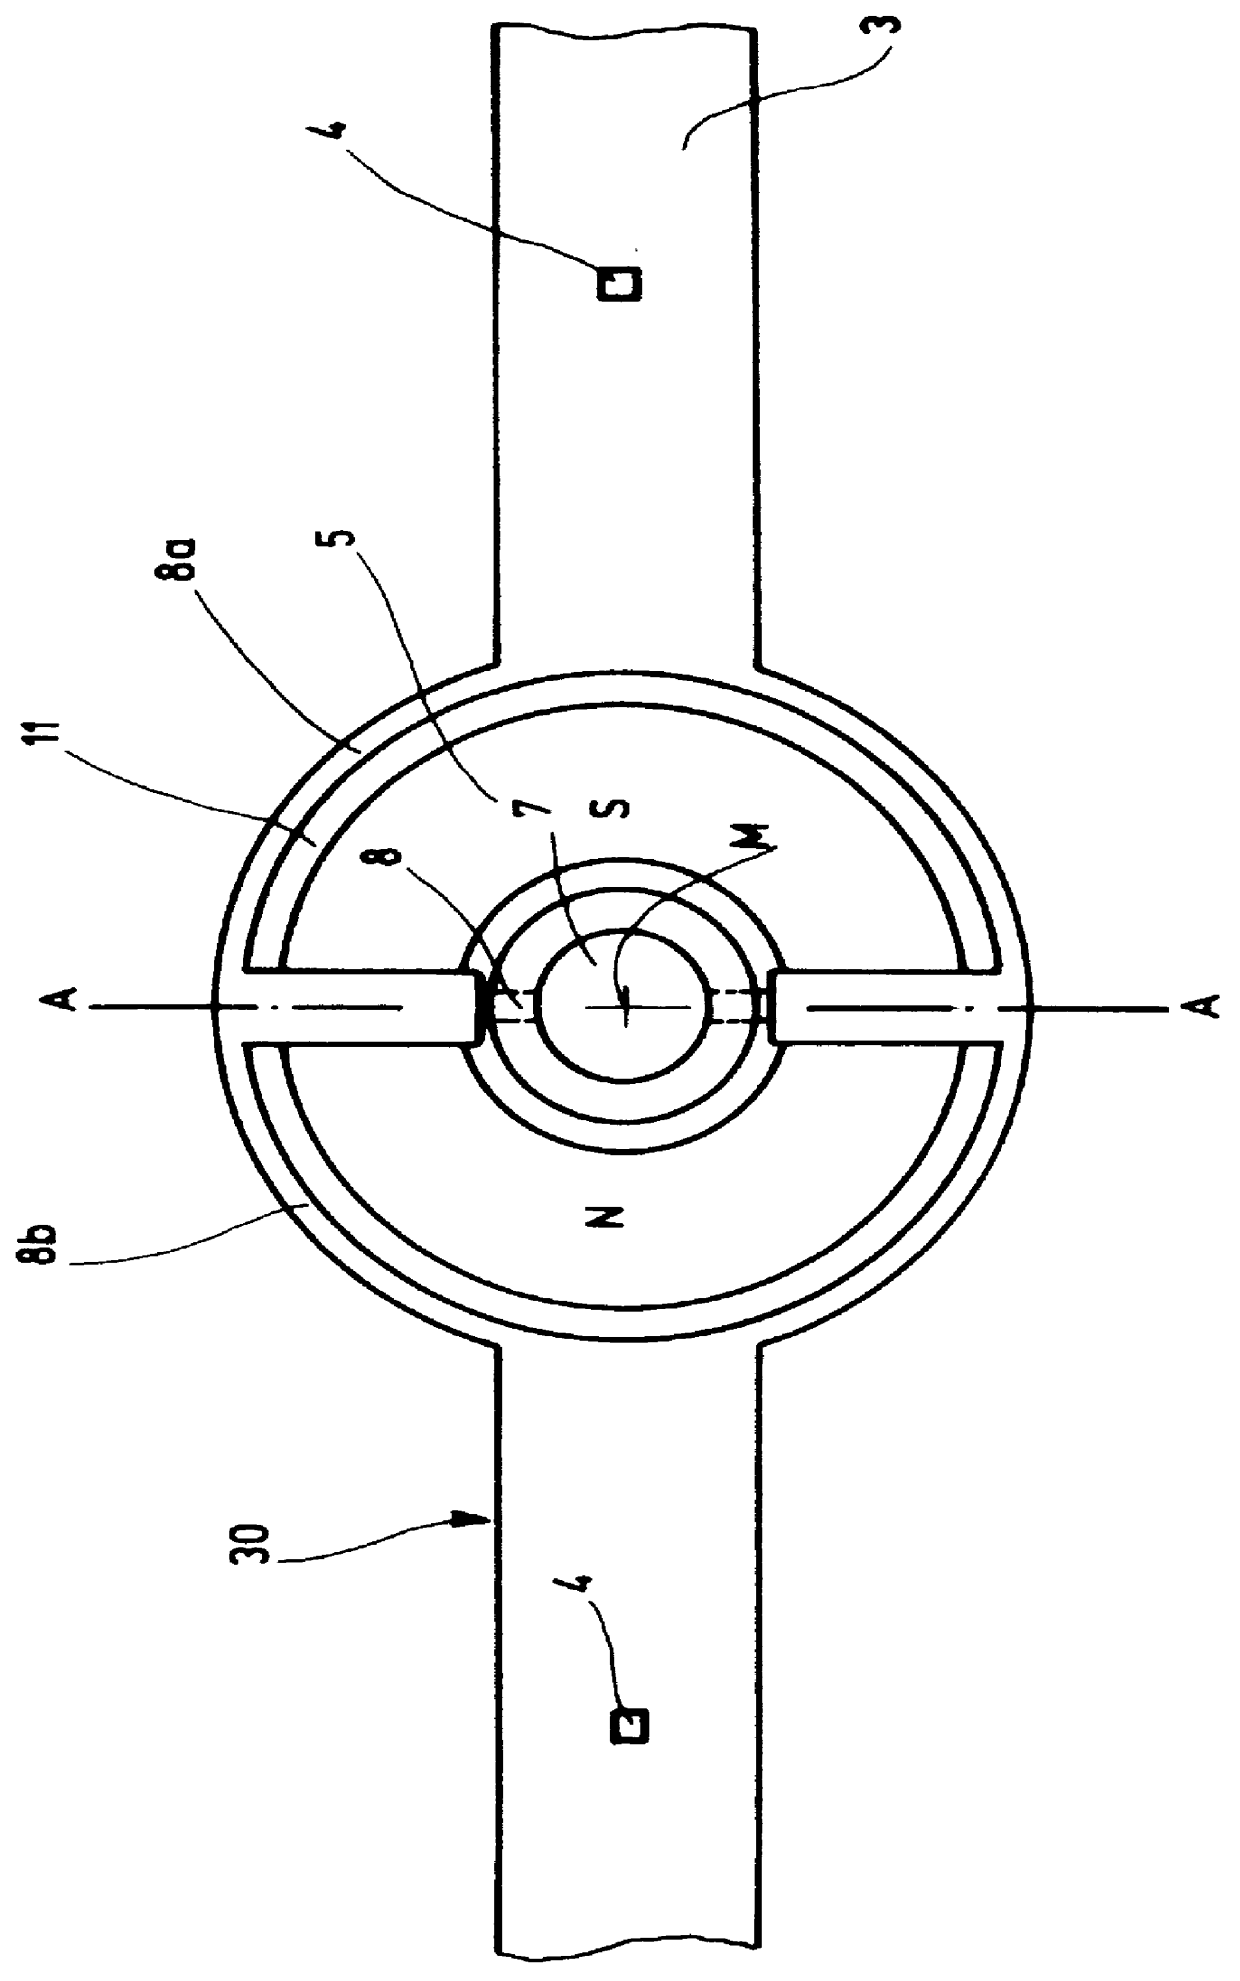 Inclination-compensating display device for a compass